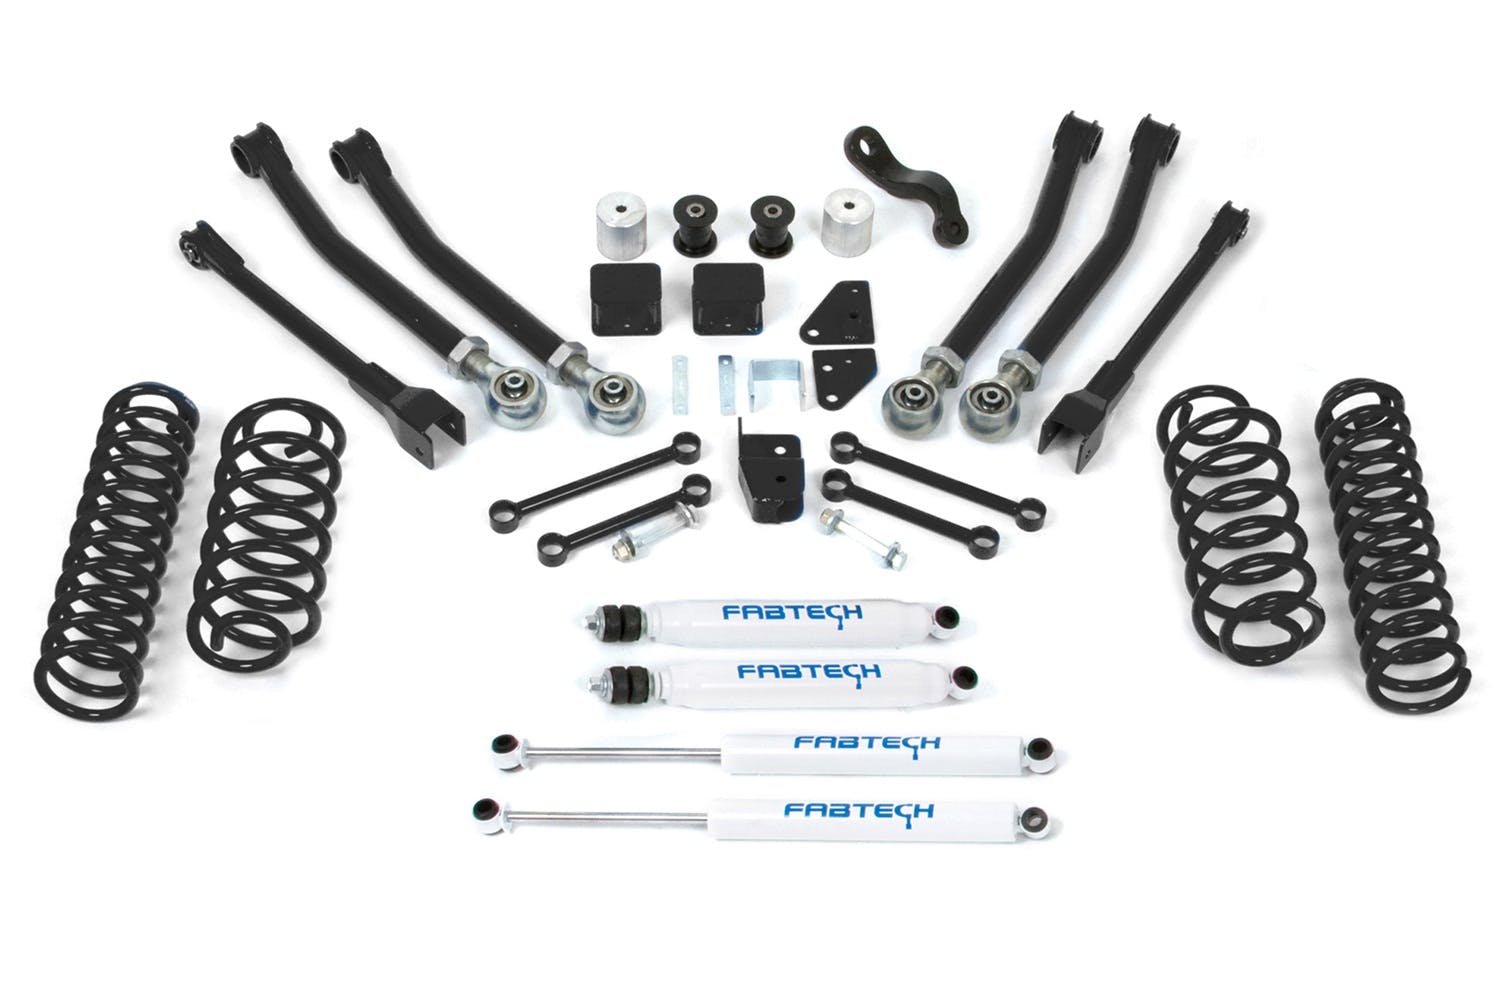 Fabtech K4038 5in. SHORTARM SYS W/COILS/PERF SHKS 07-12 JEEP JK 4WD